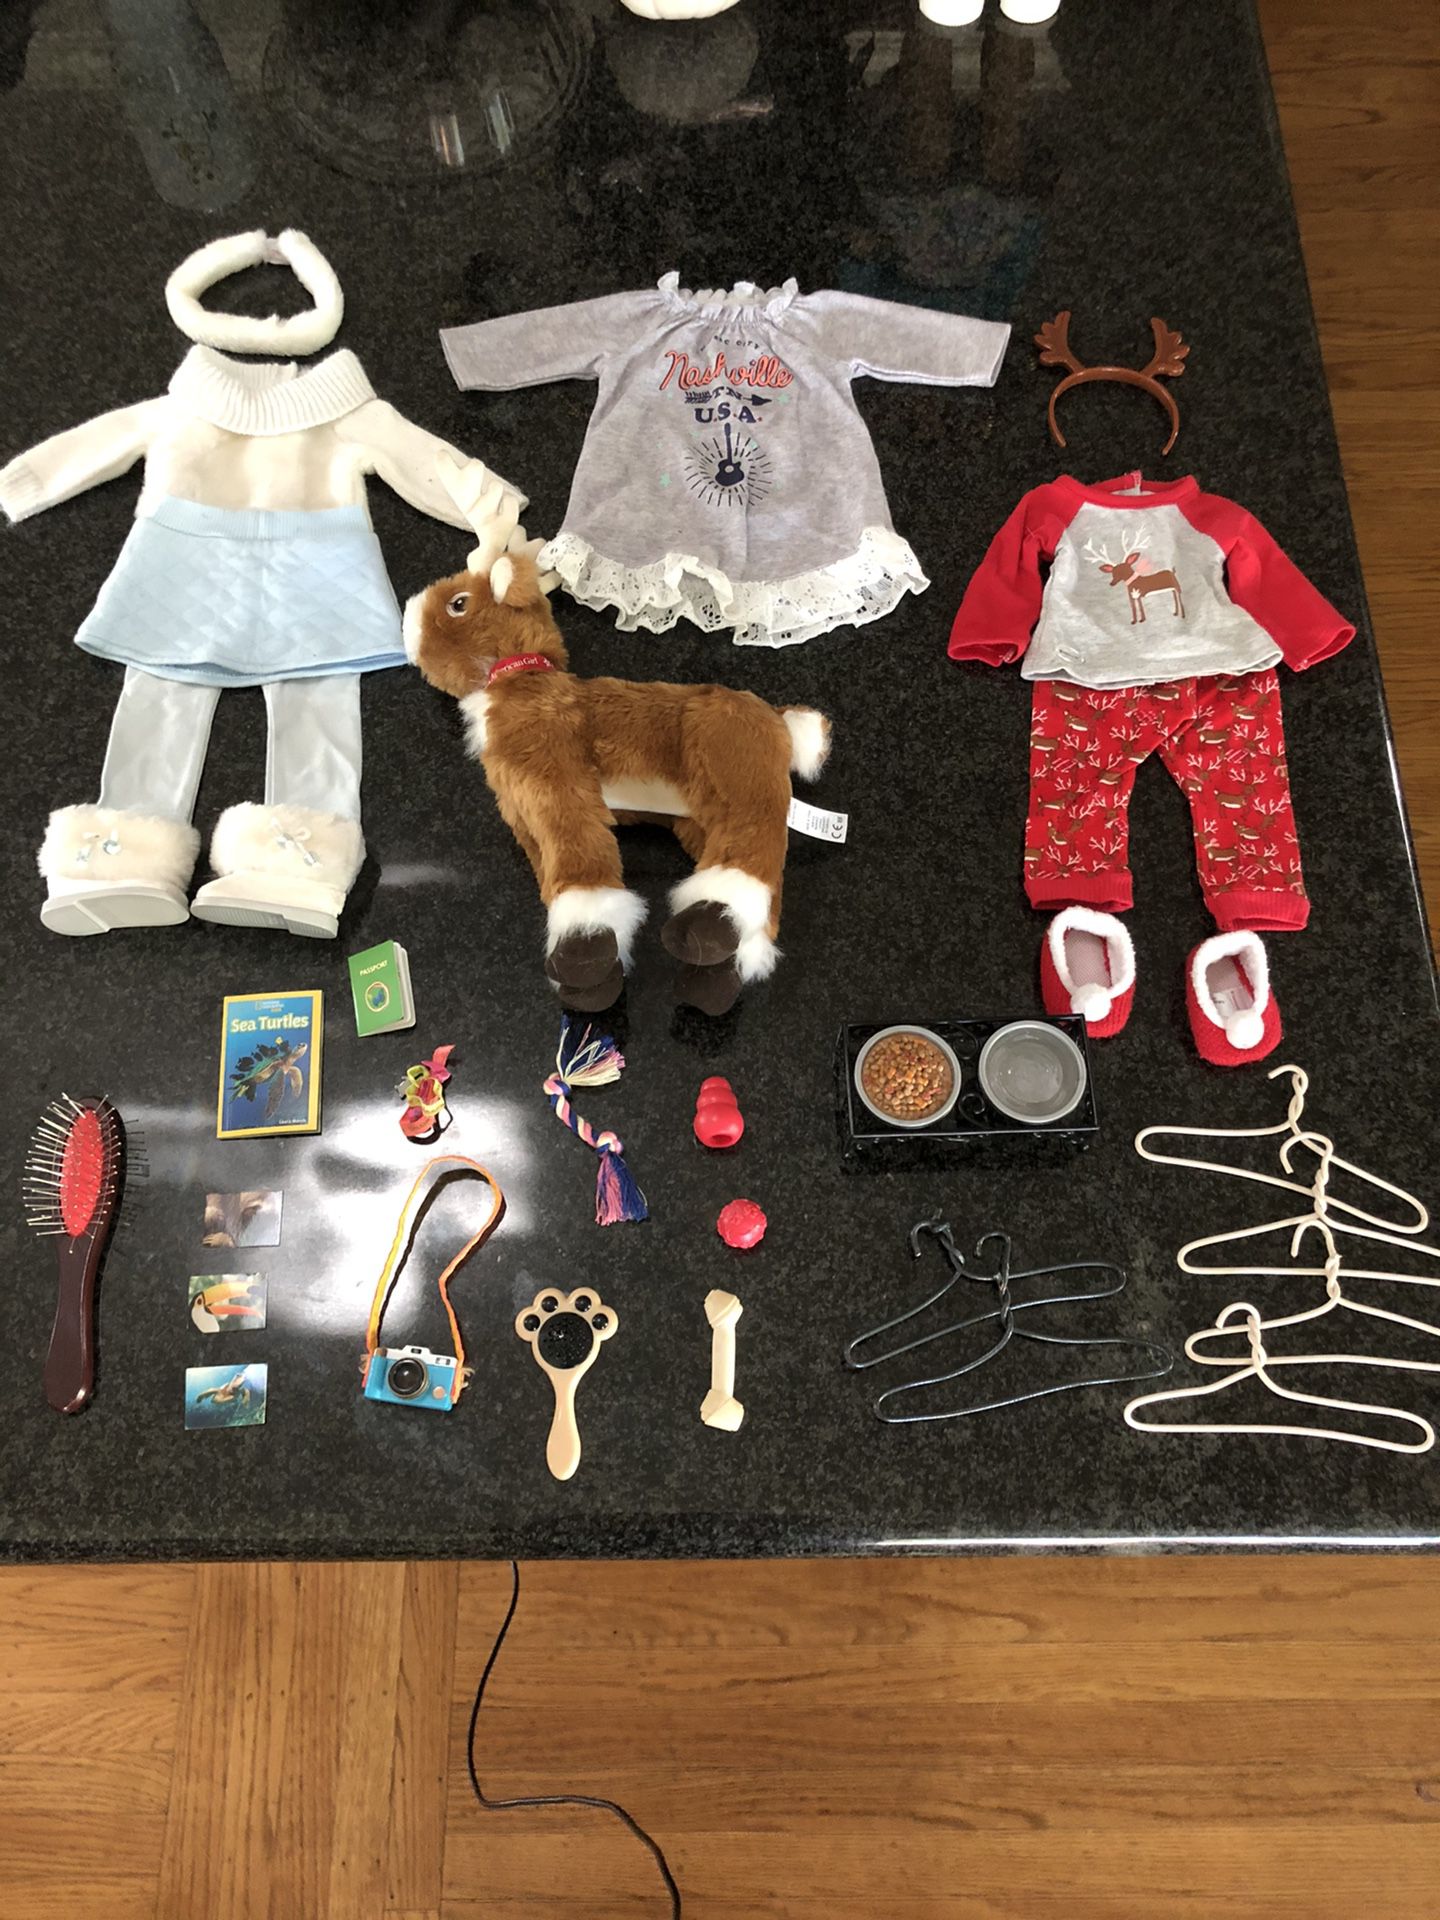 American Girl Doll accessories